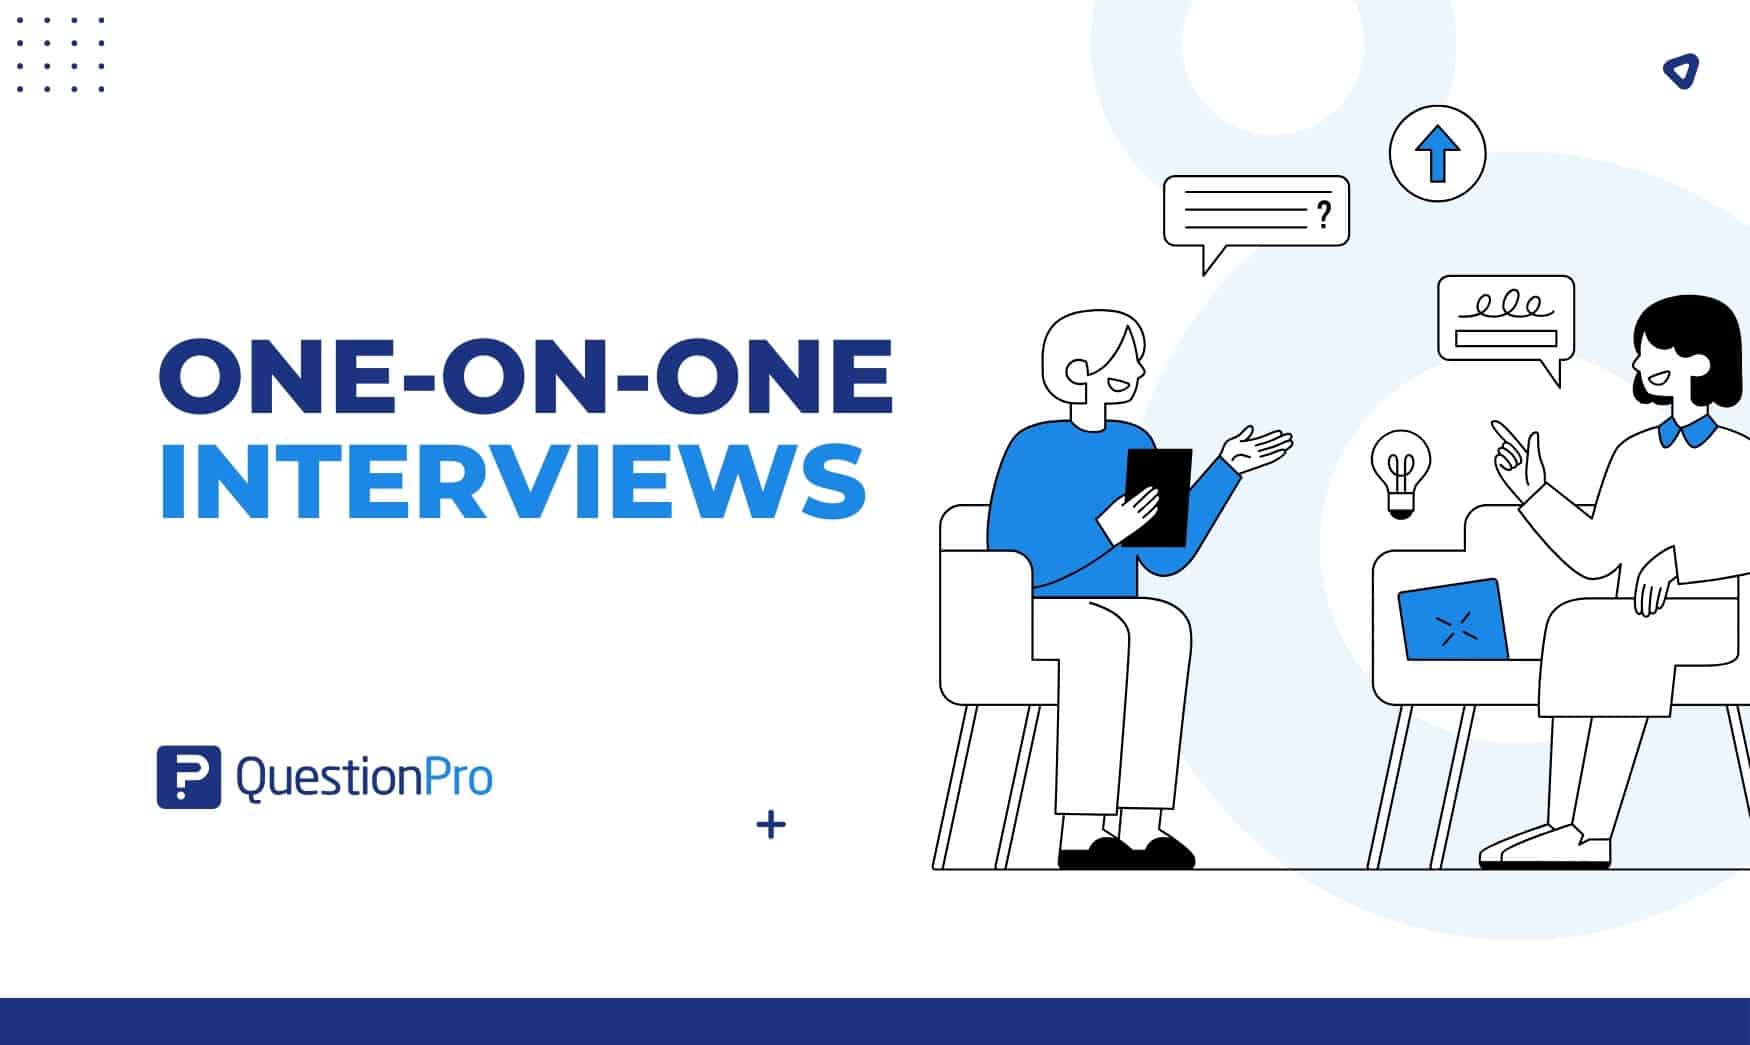 One-on-one interviews